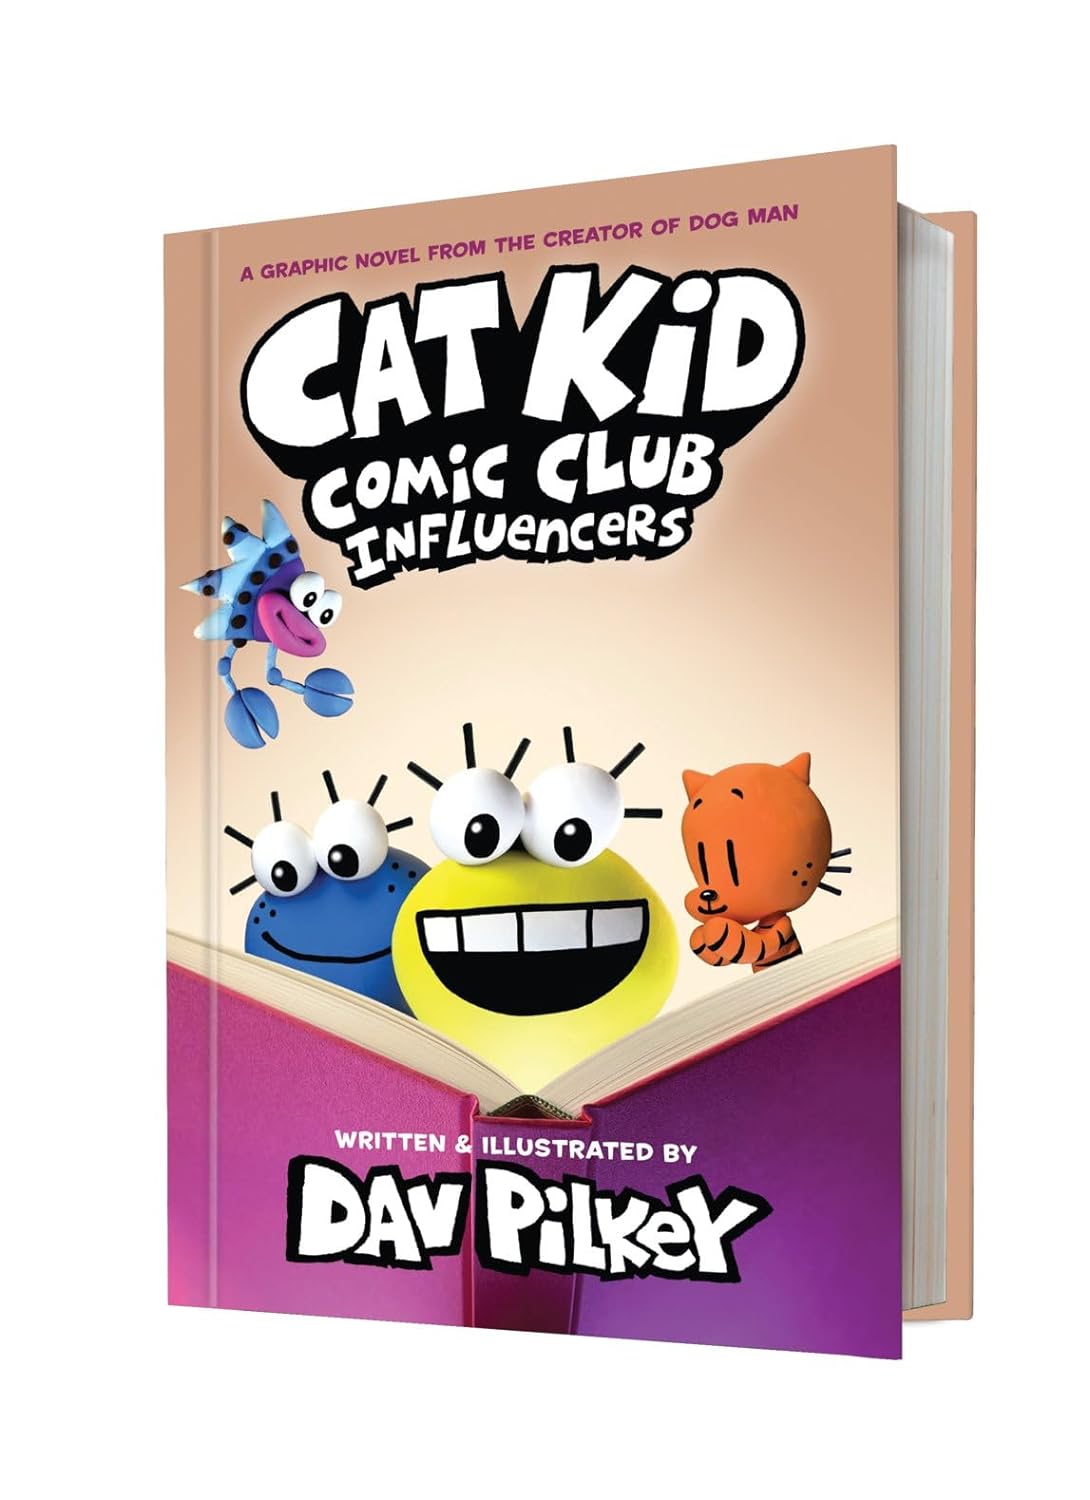 Image for "Cat Kid Comic Club Influencers"